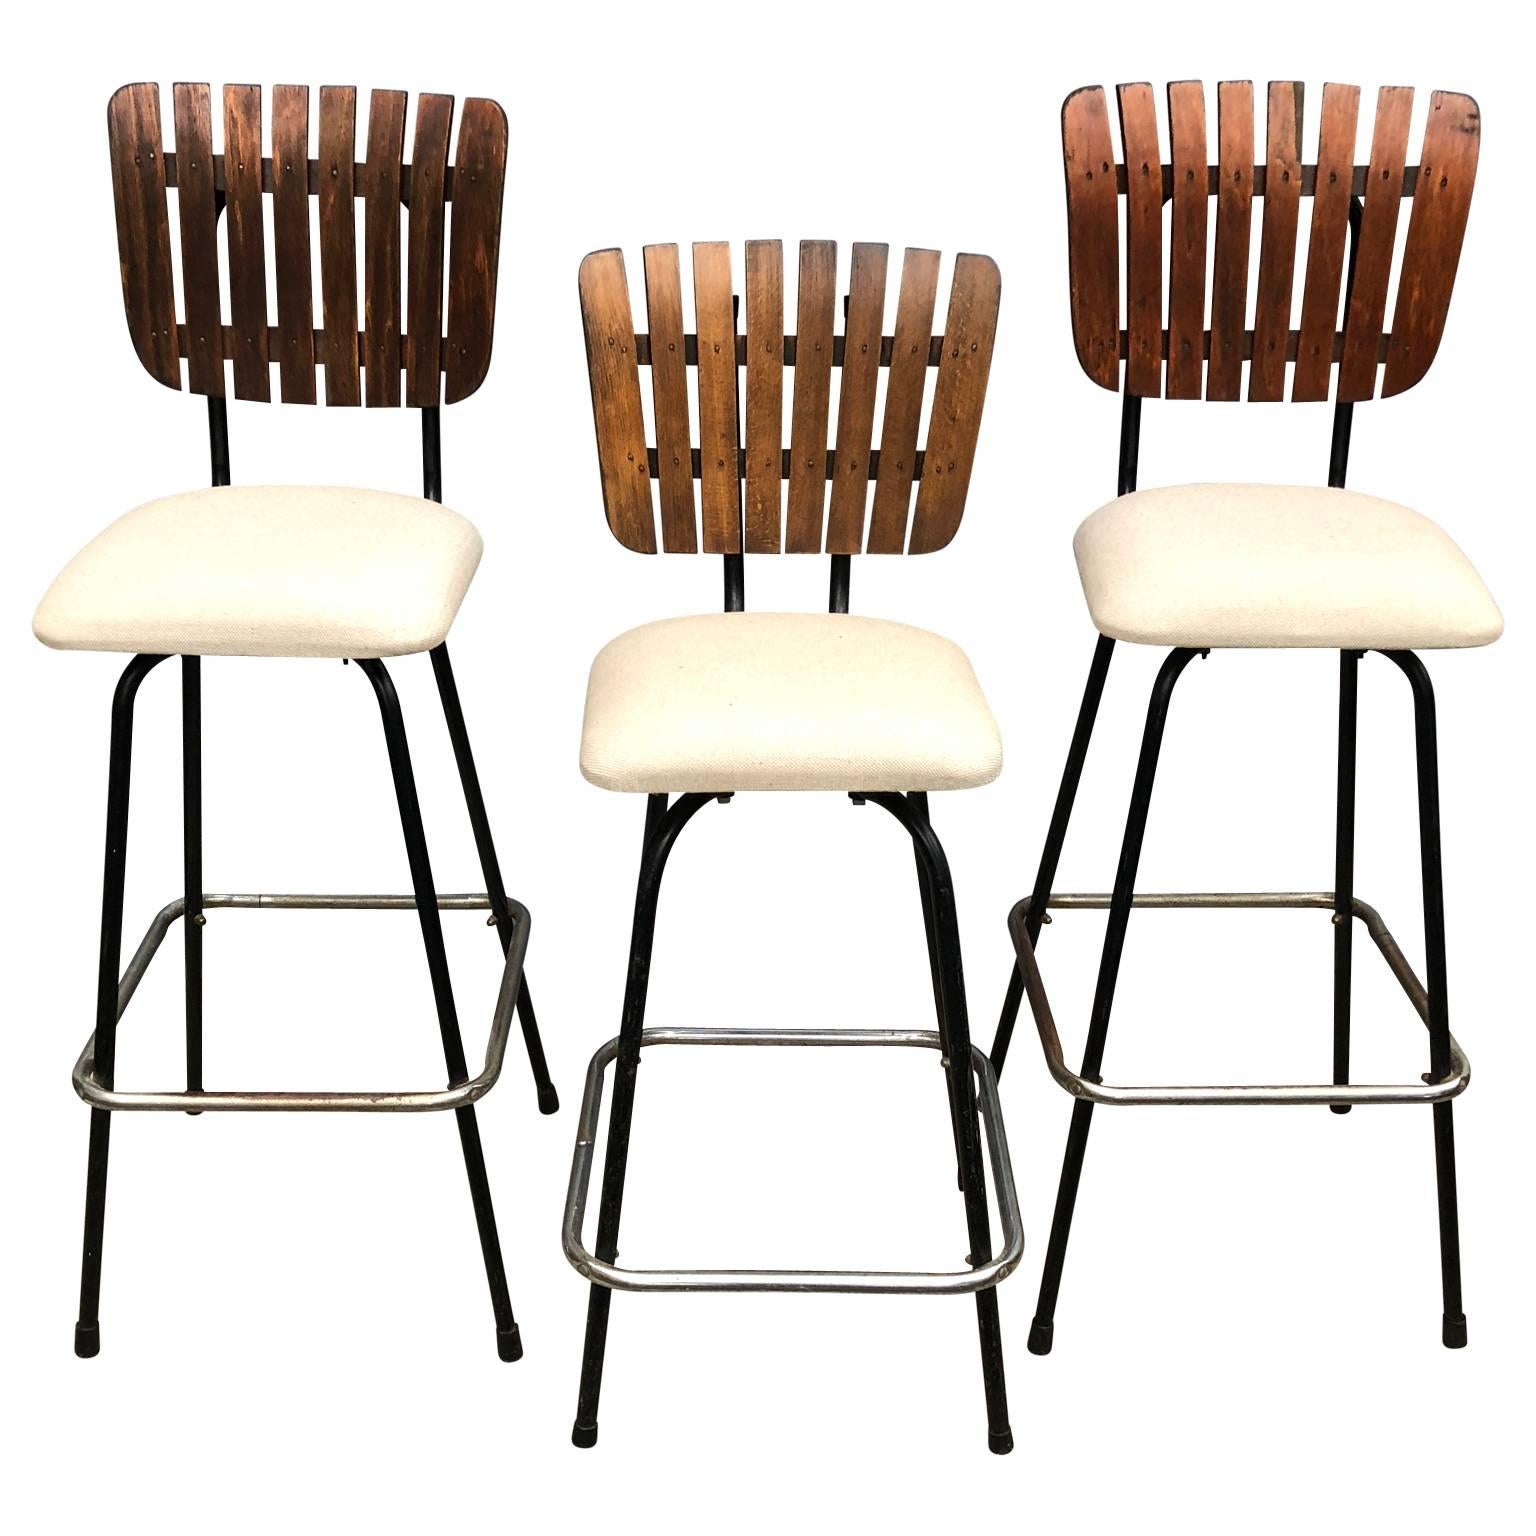 2 + 1 Mid-Century Modern bar stools in the style of Arthur Umanoff, seats are newly upholstered.
One pair and one bar stool that is lower than the pair
Seats swivel 360 degrees.

 